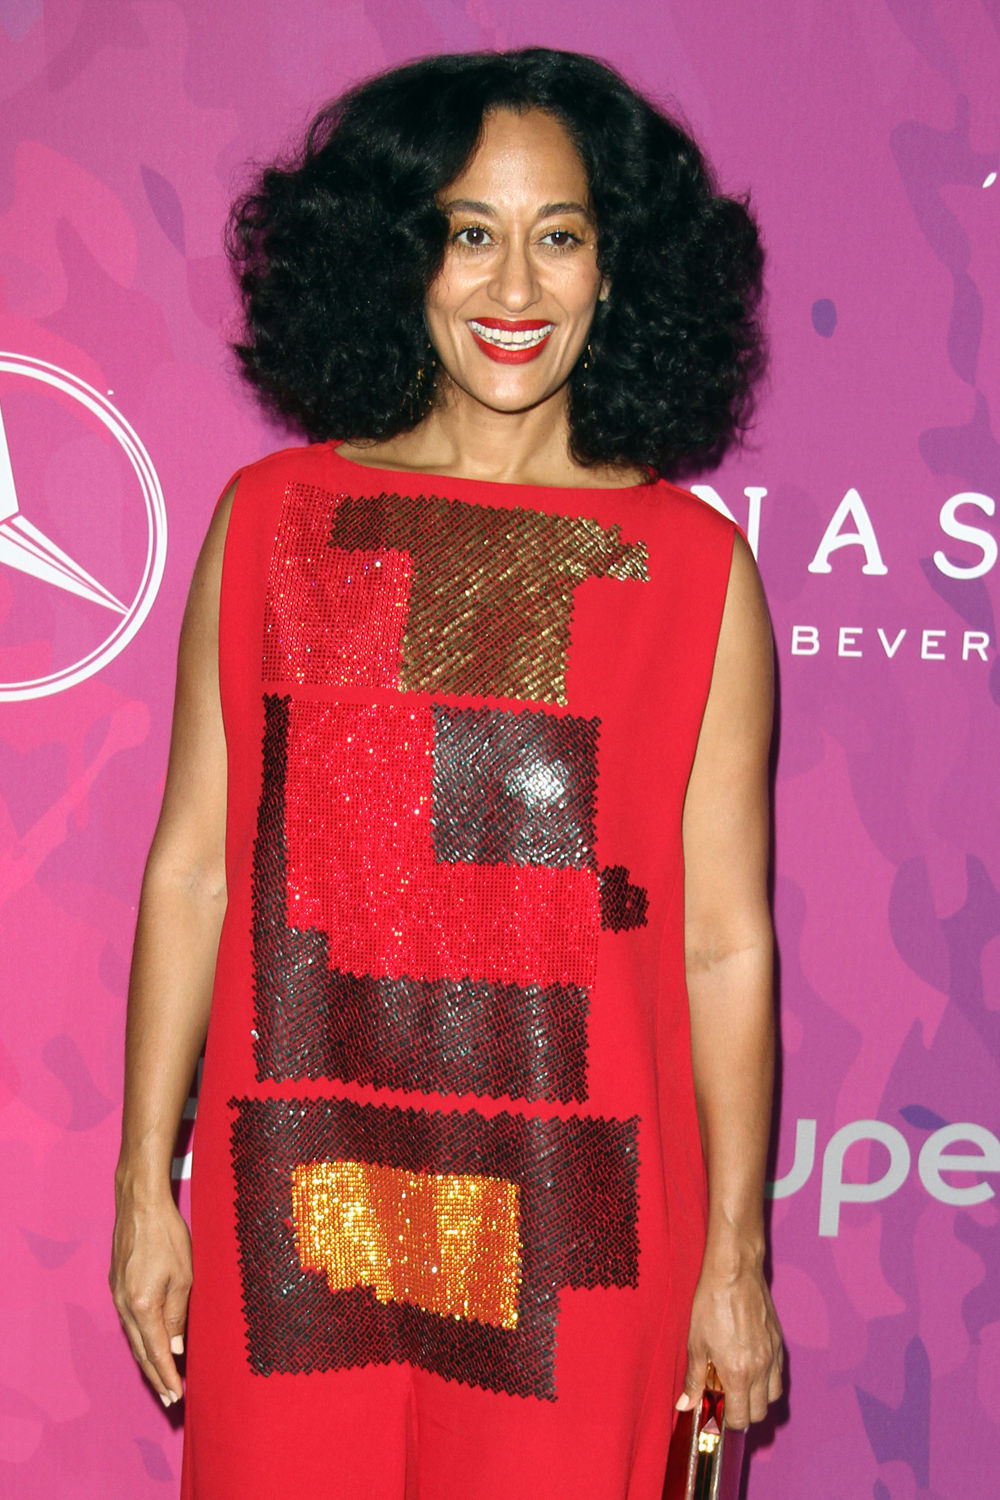 tracee-ellis-ross-stylemakers-awards-2016-red-carpet-fashion-chalayan-tom-lorenzo-site-1